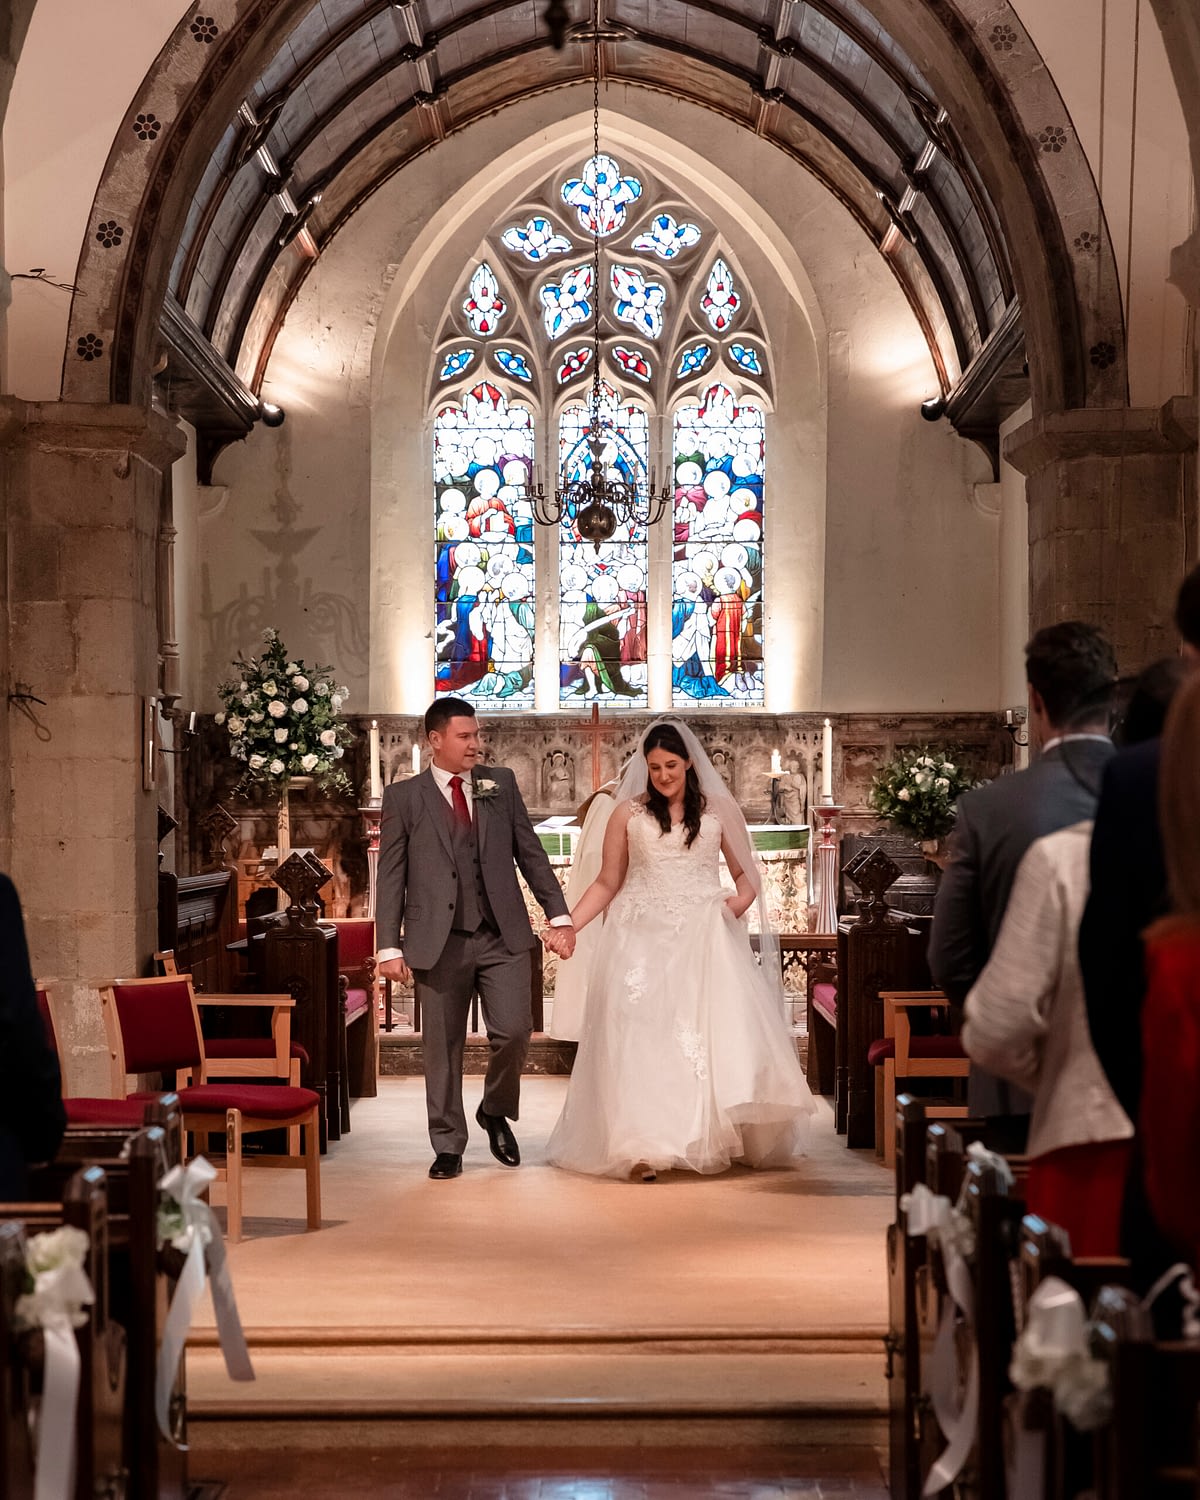 bride and groom walking together in church